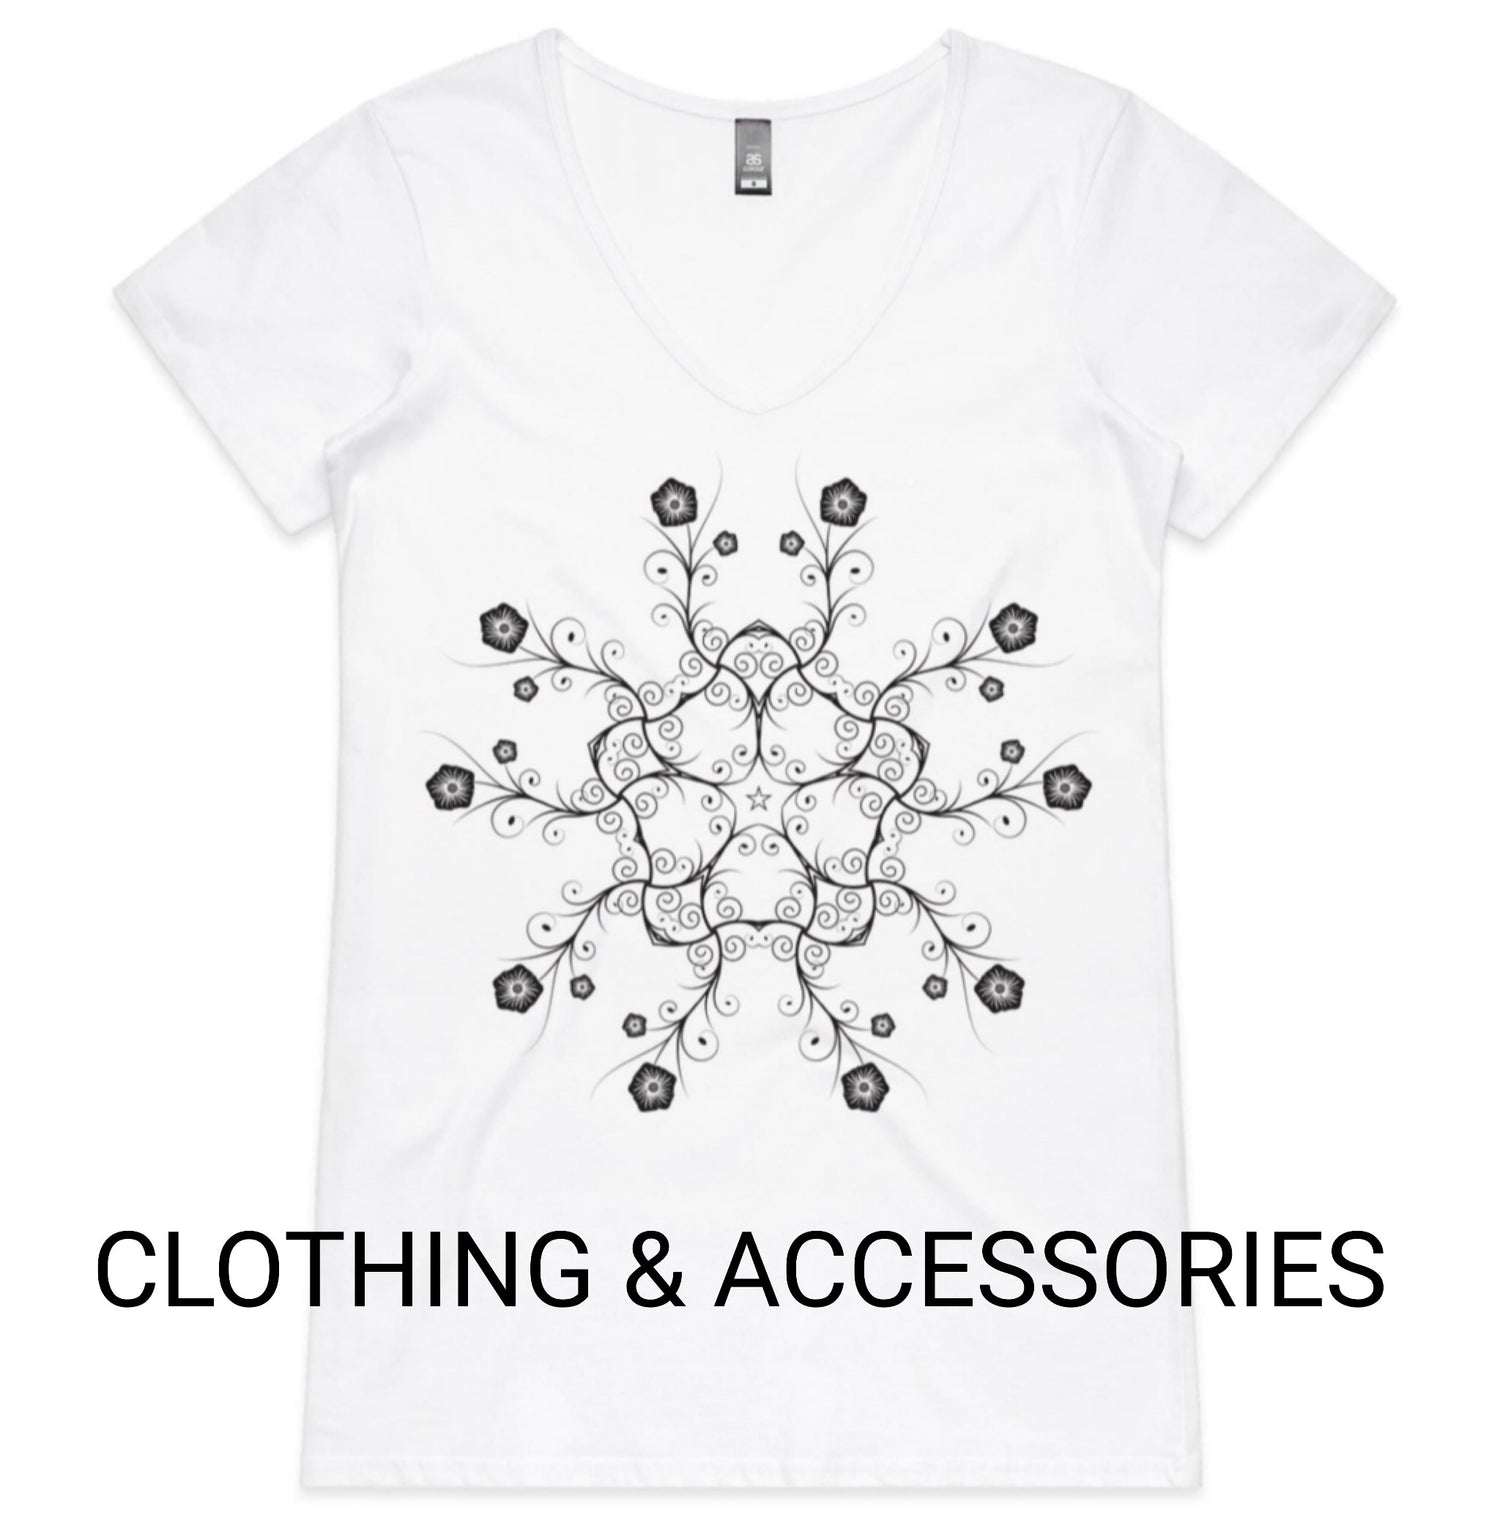 CLOTHING & ACCESSORIES